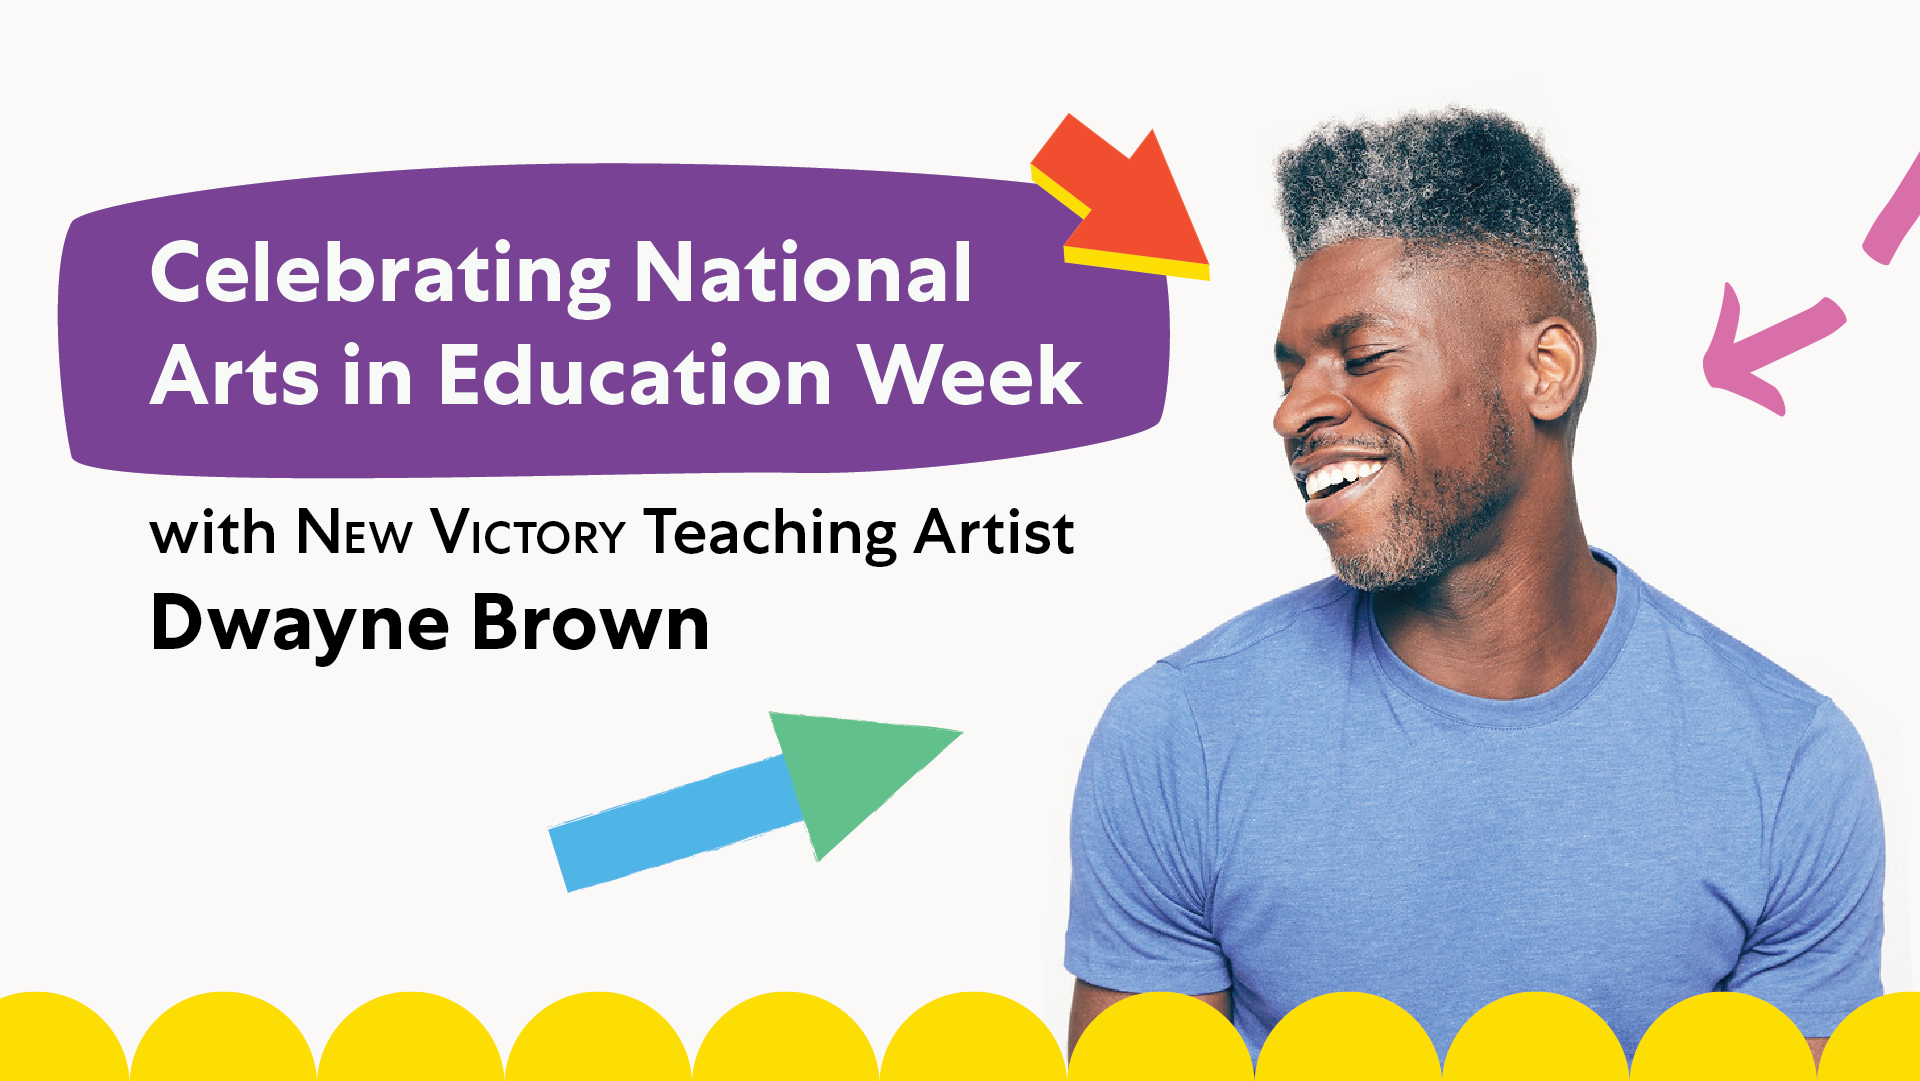 Three multi-color arrow graphics pointing to a man in a blue shirt with short, black and silver hair looking to the left and smiling against a white background, with the text Celebrating National Arts in Education Week with New Victory Teaching Artist Dwayne Brown on the left side of the image